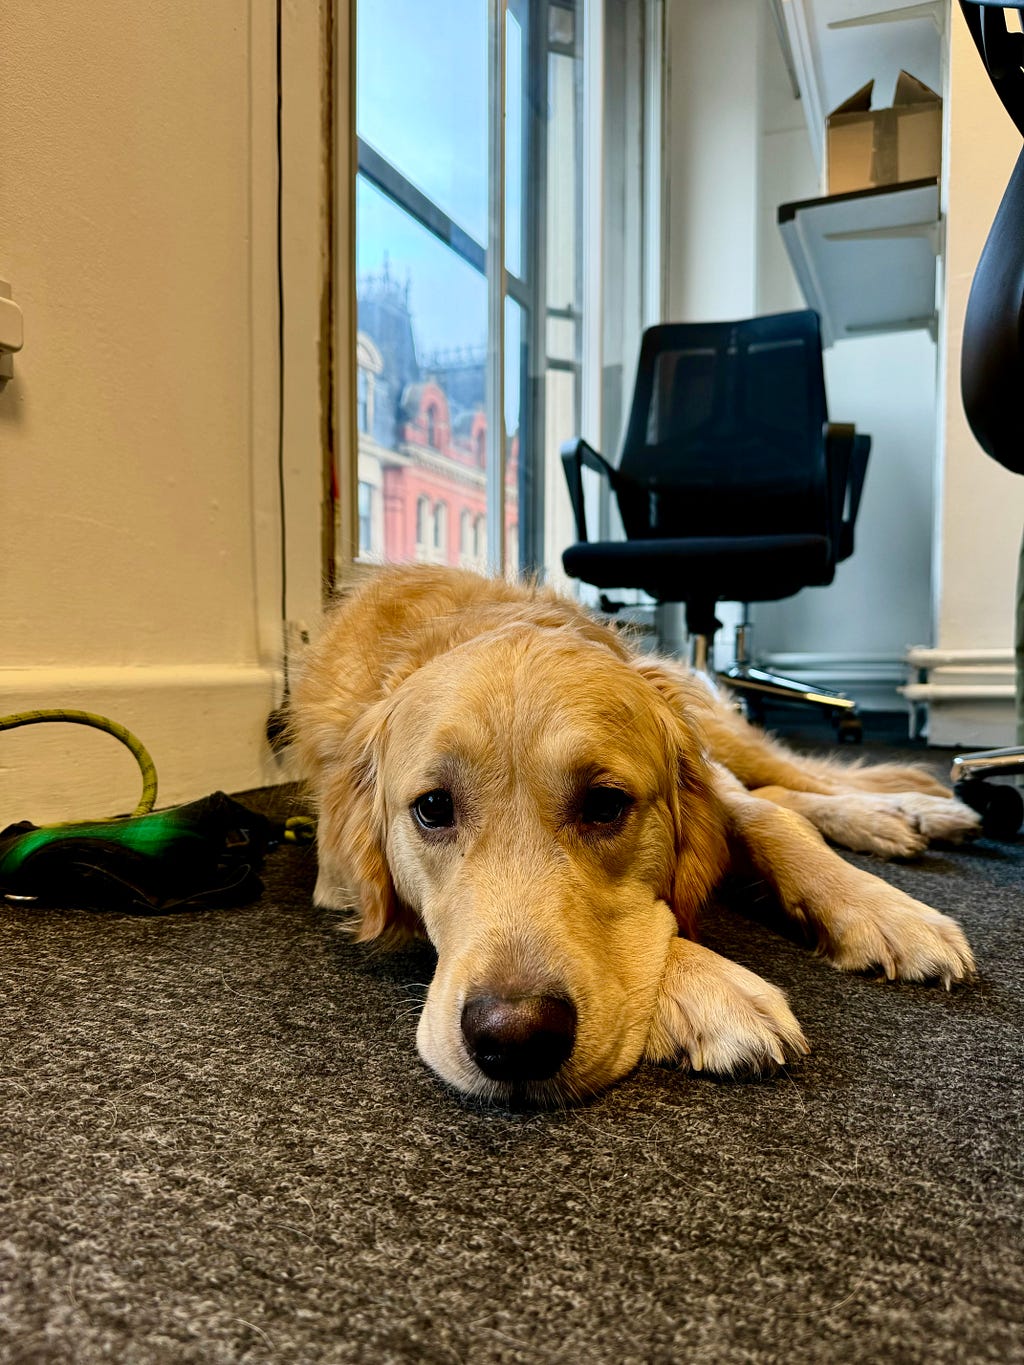 Buster the Golden Retriever lying down in the office